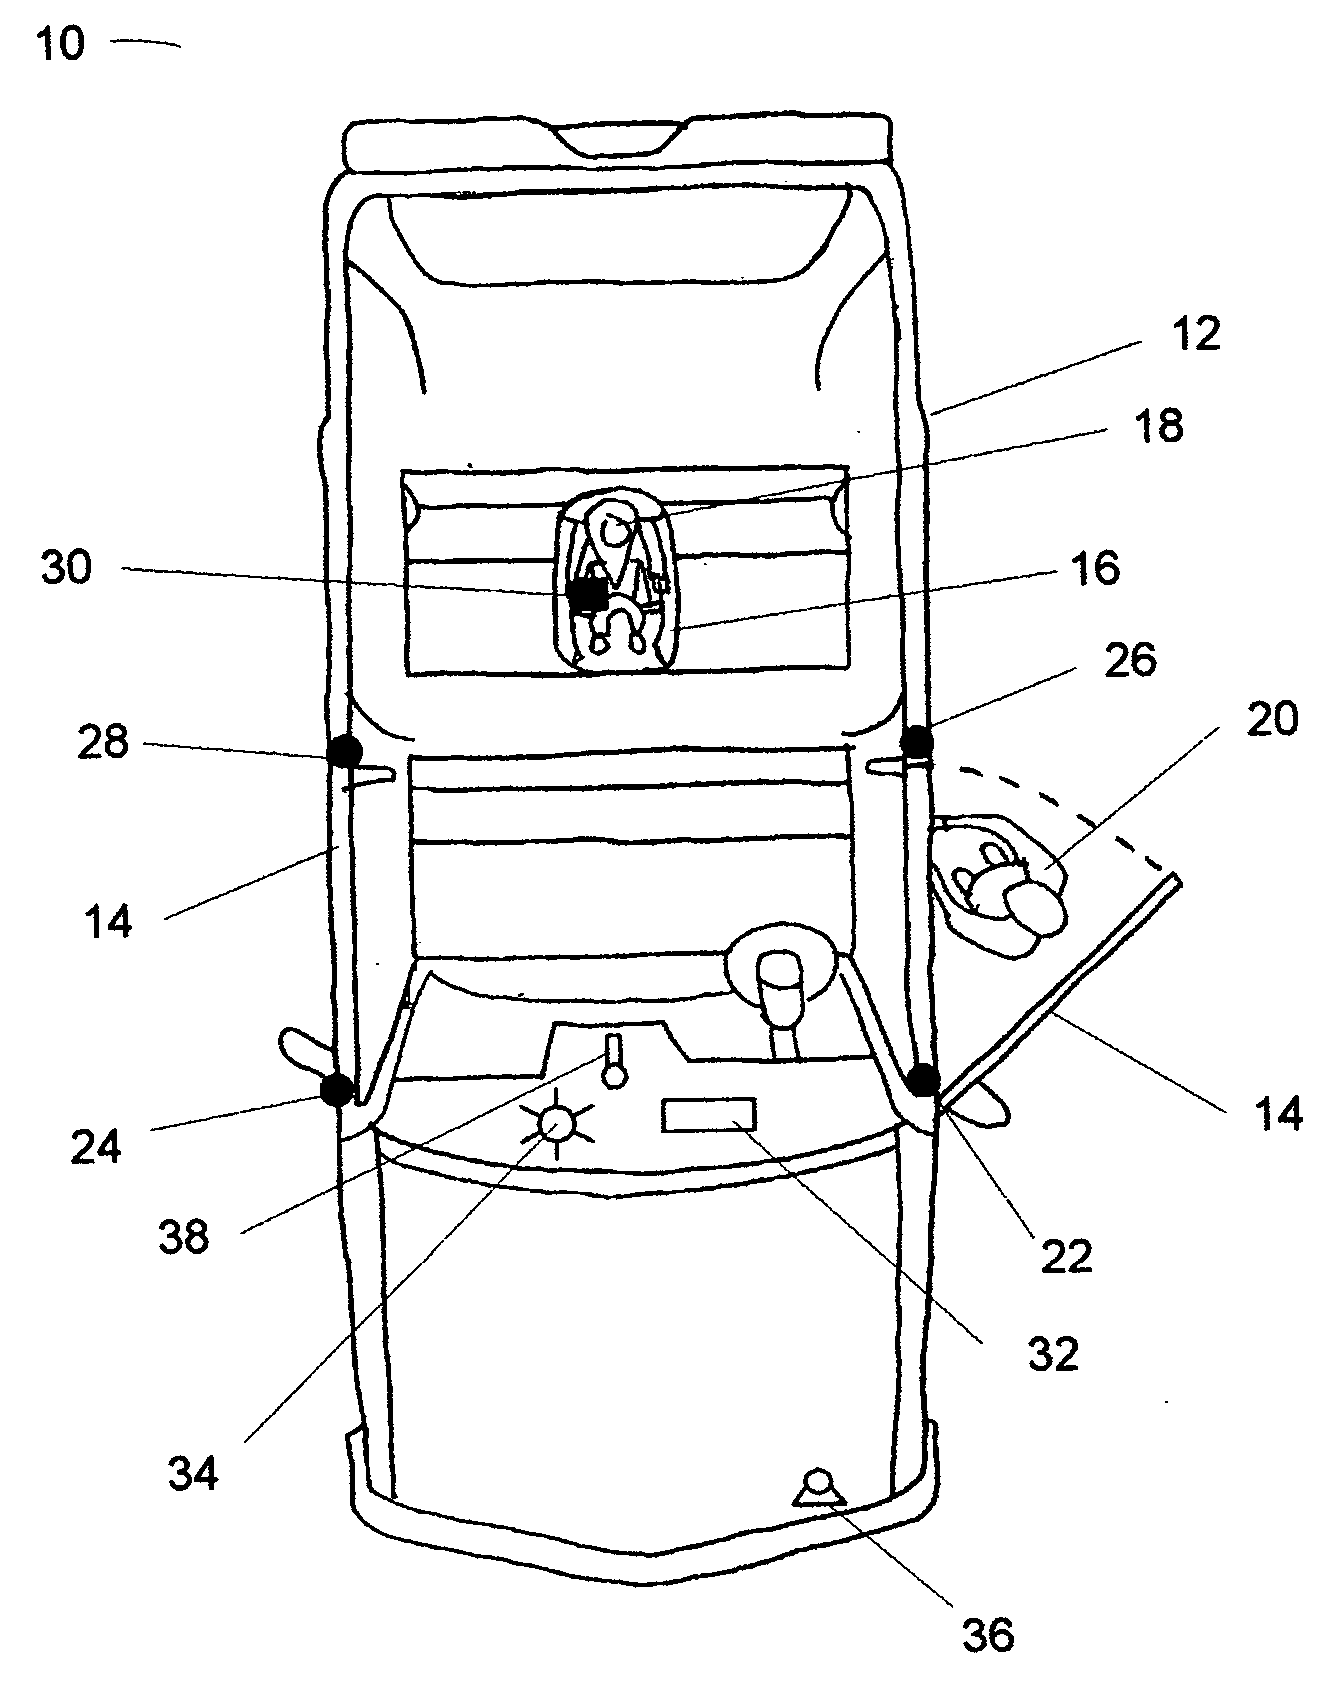 Occupant detection and notification system for use wiith a child car seat